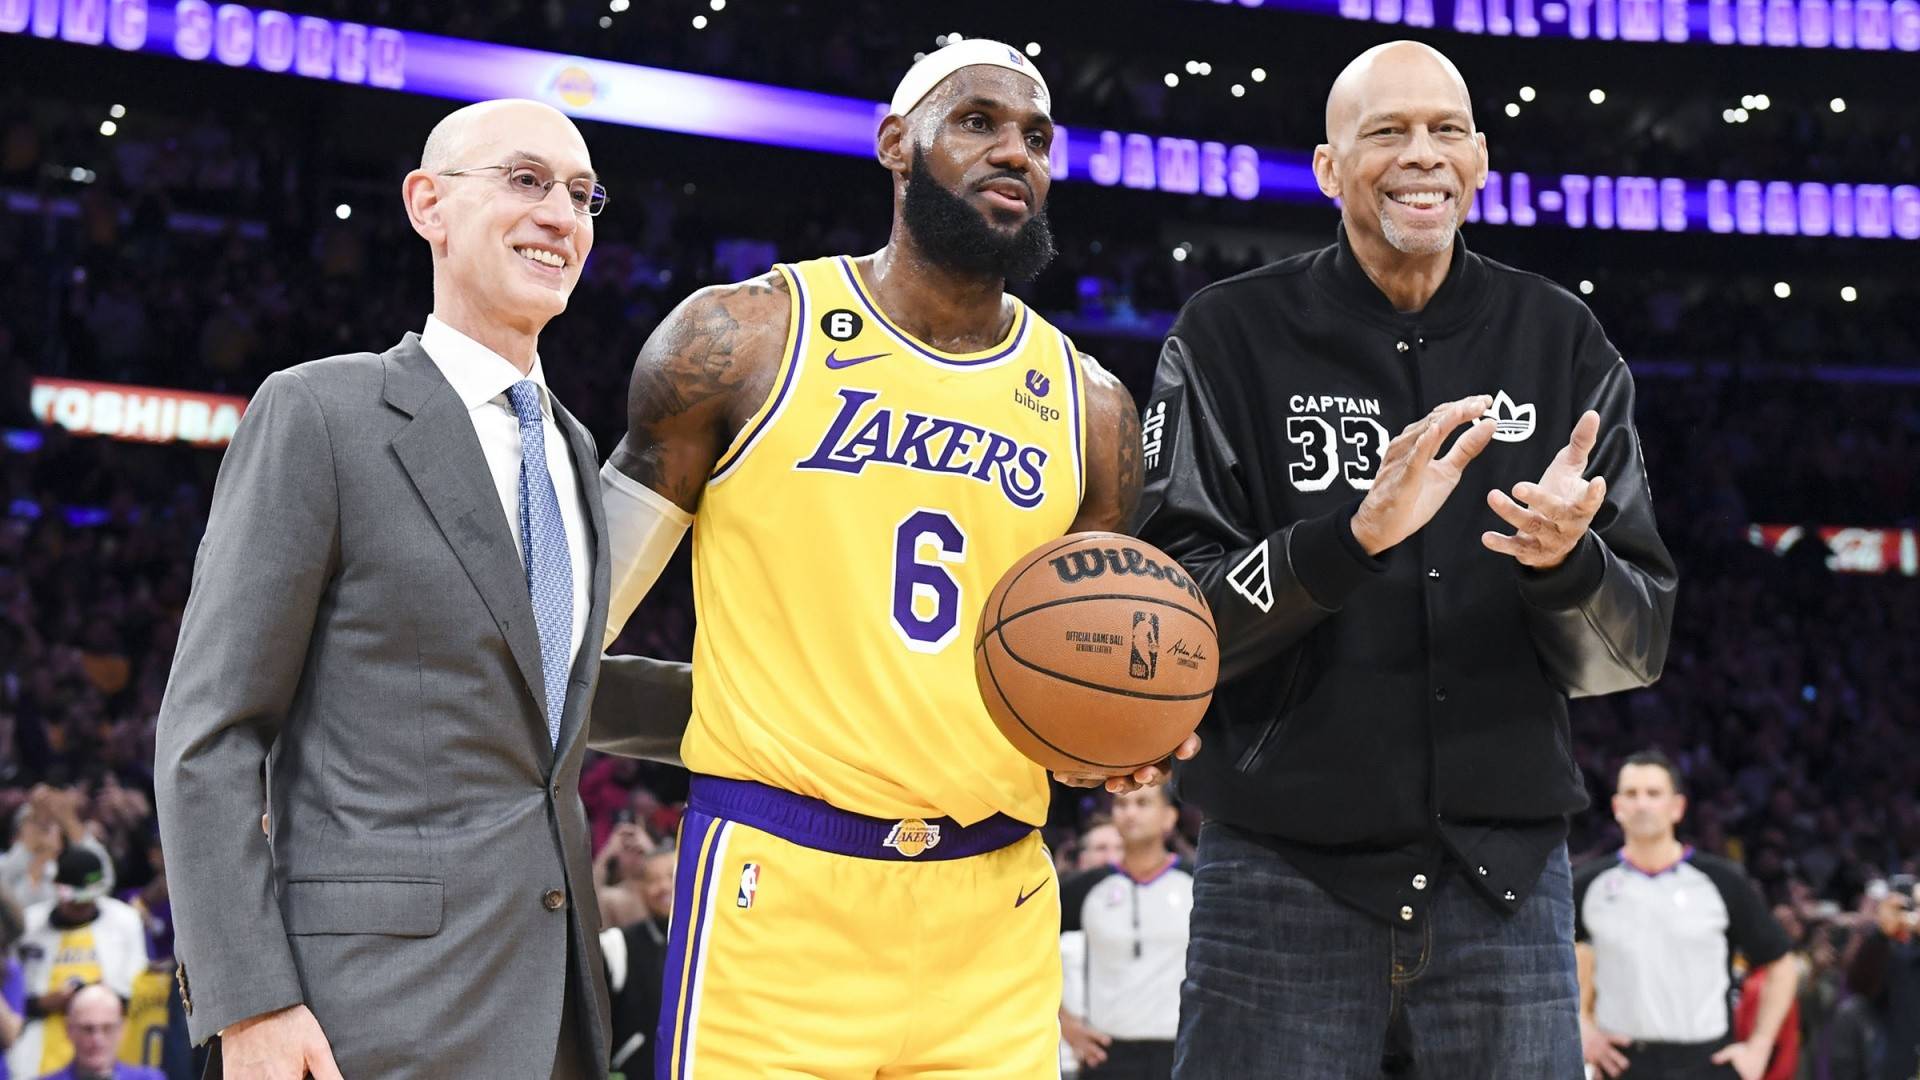 LeBron James to break another NBA record as Lakers star captains